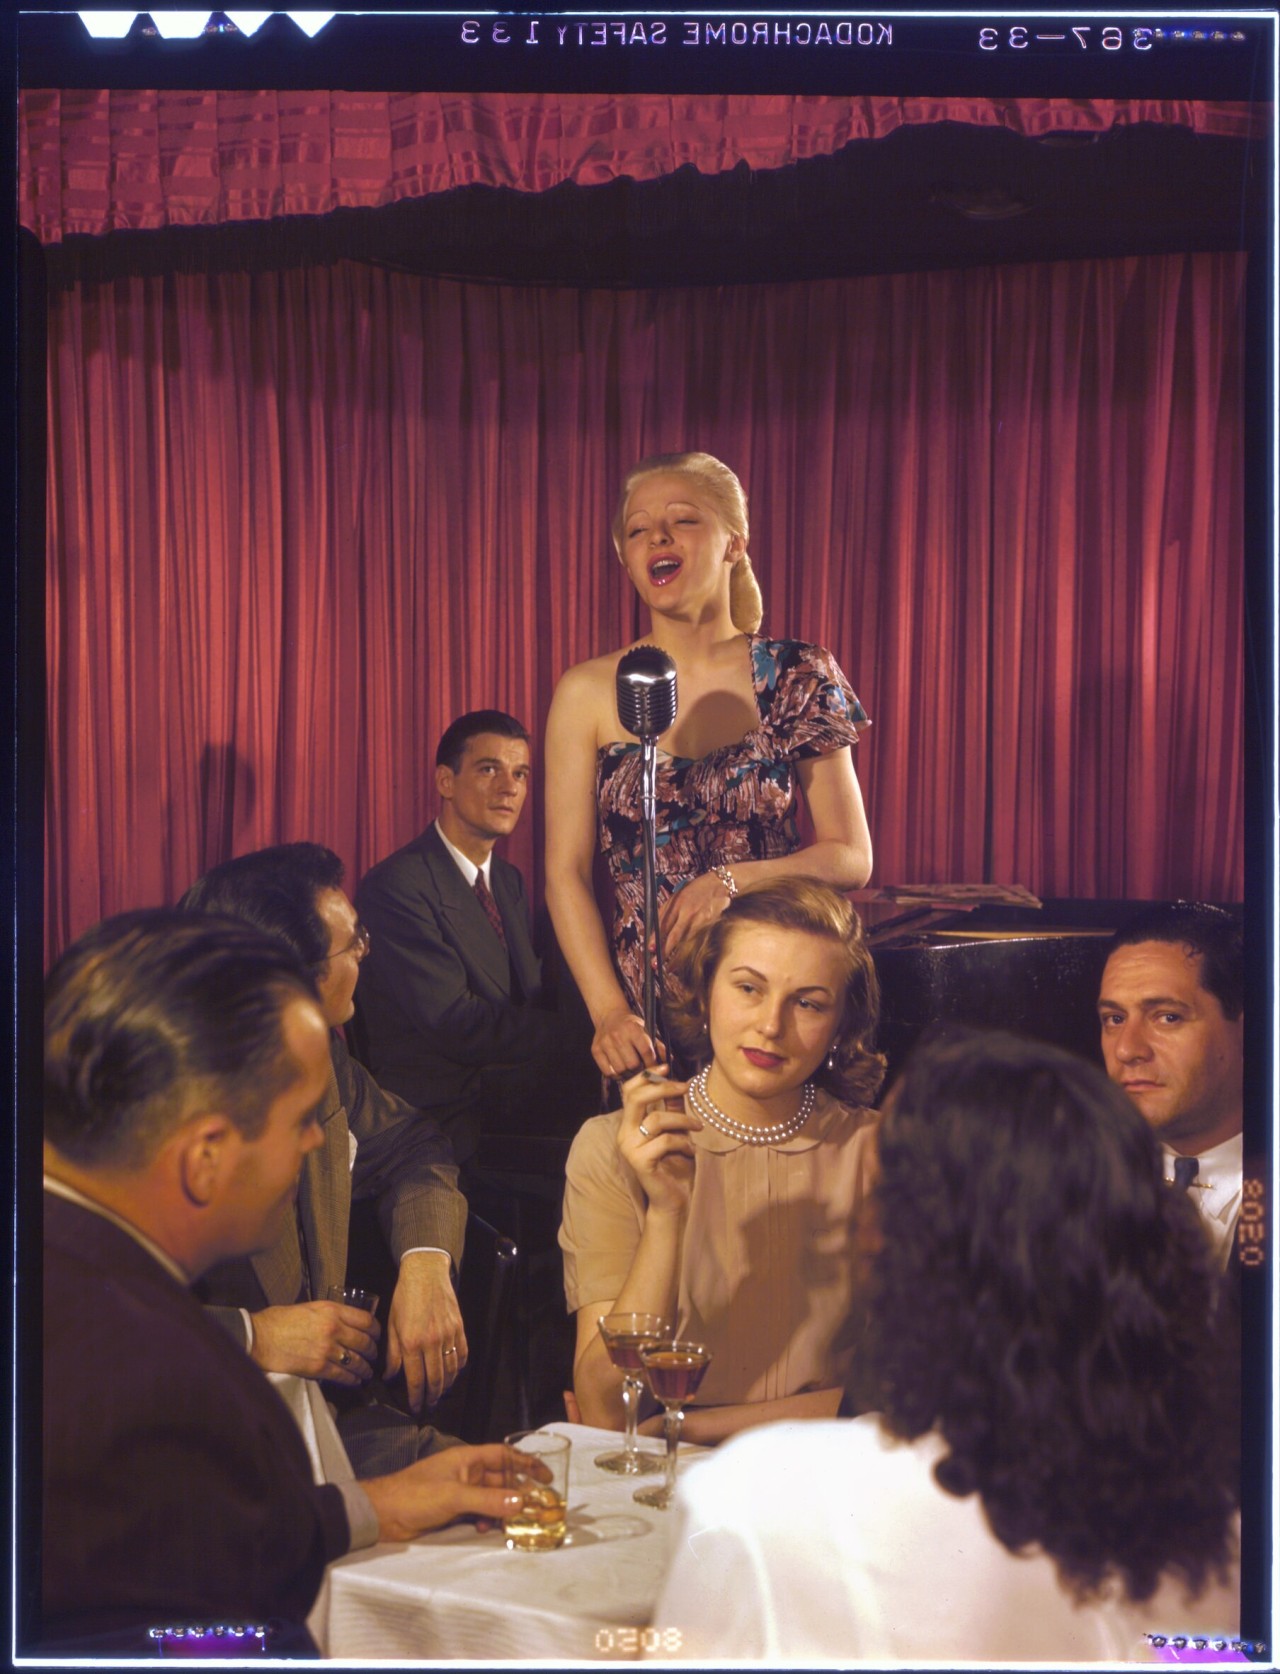 solo-vintage:  Bohemians, performers and clubgoers of the 52nd street scene. 1948.